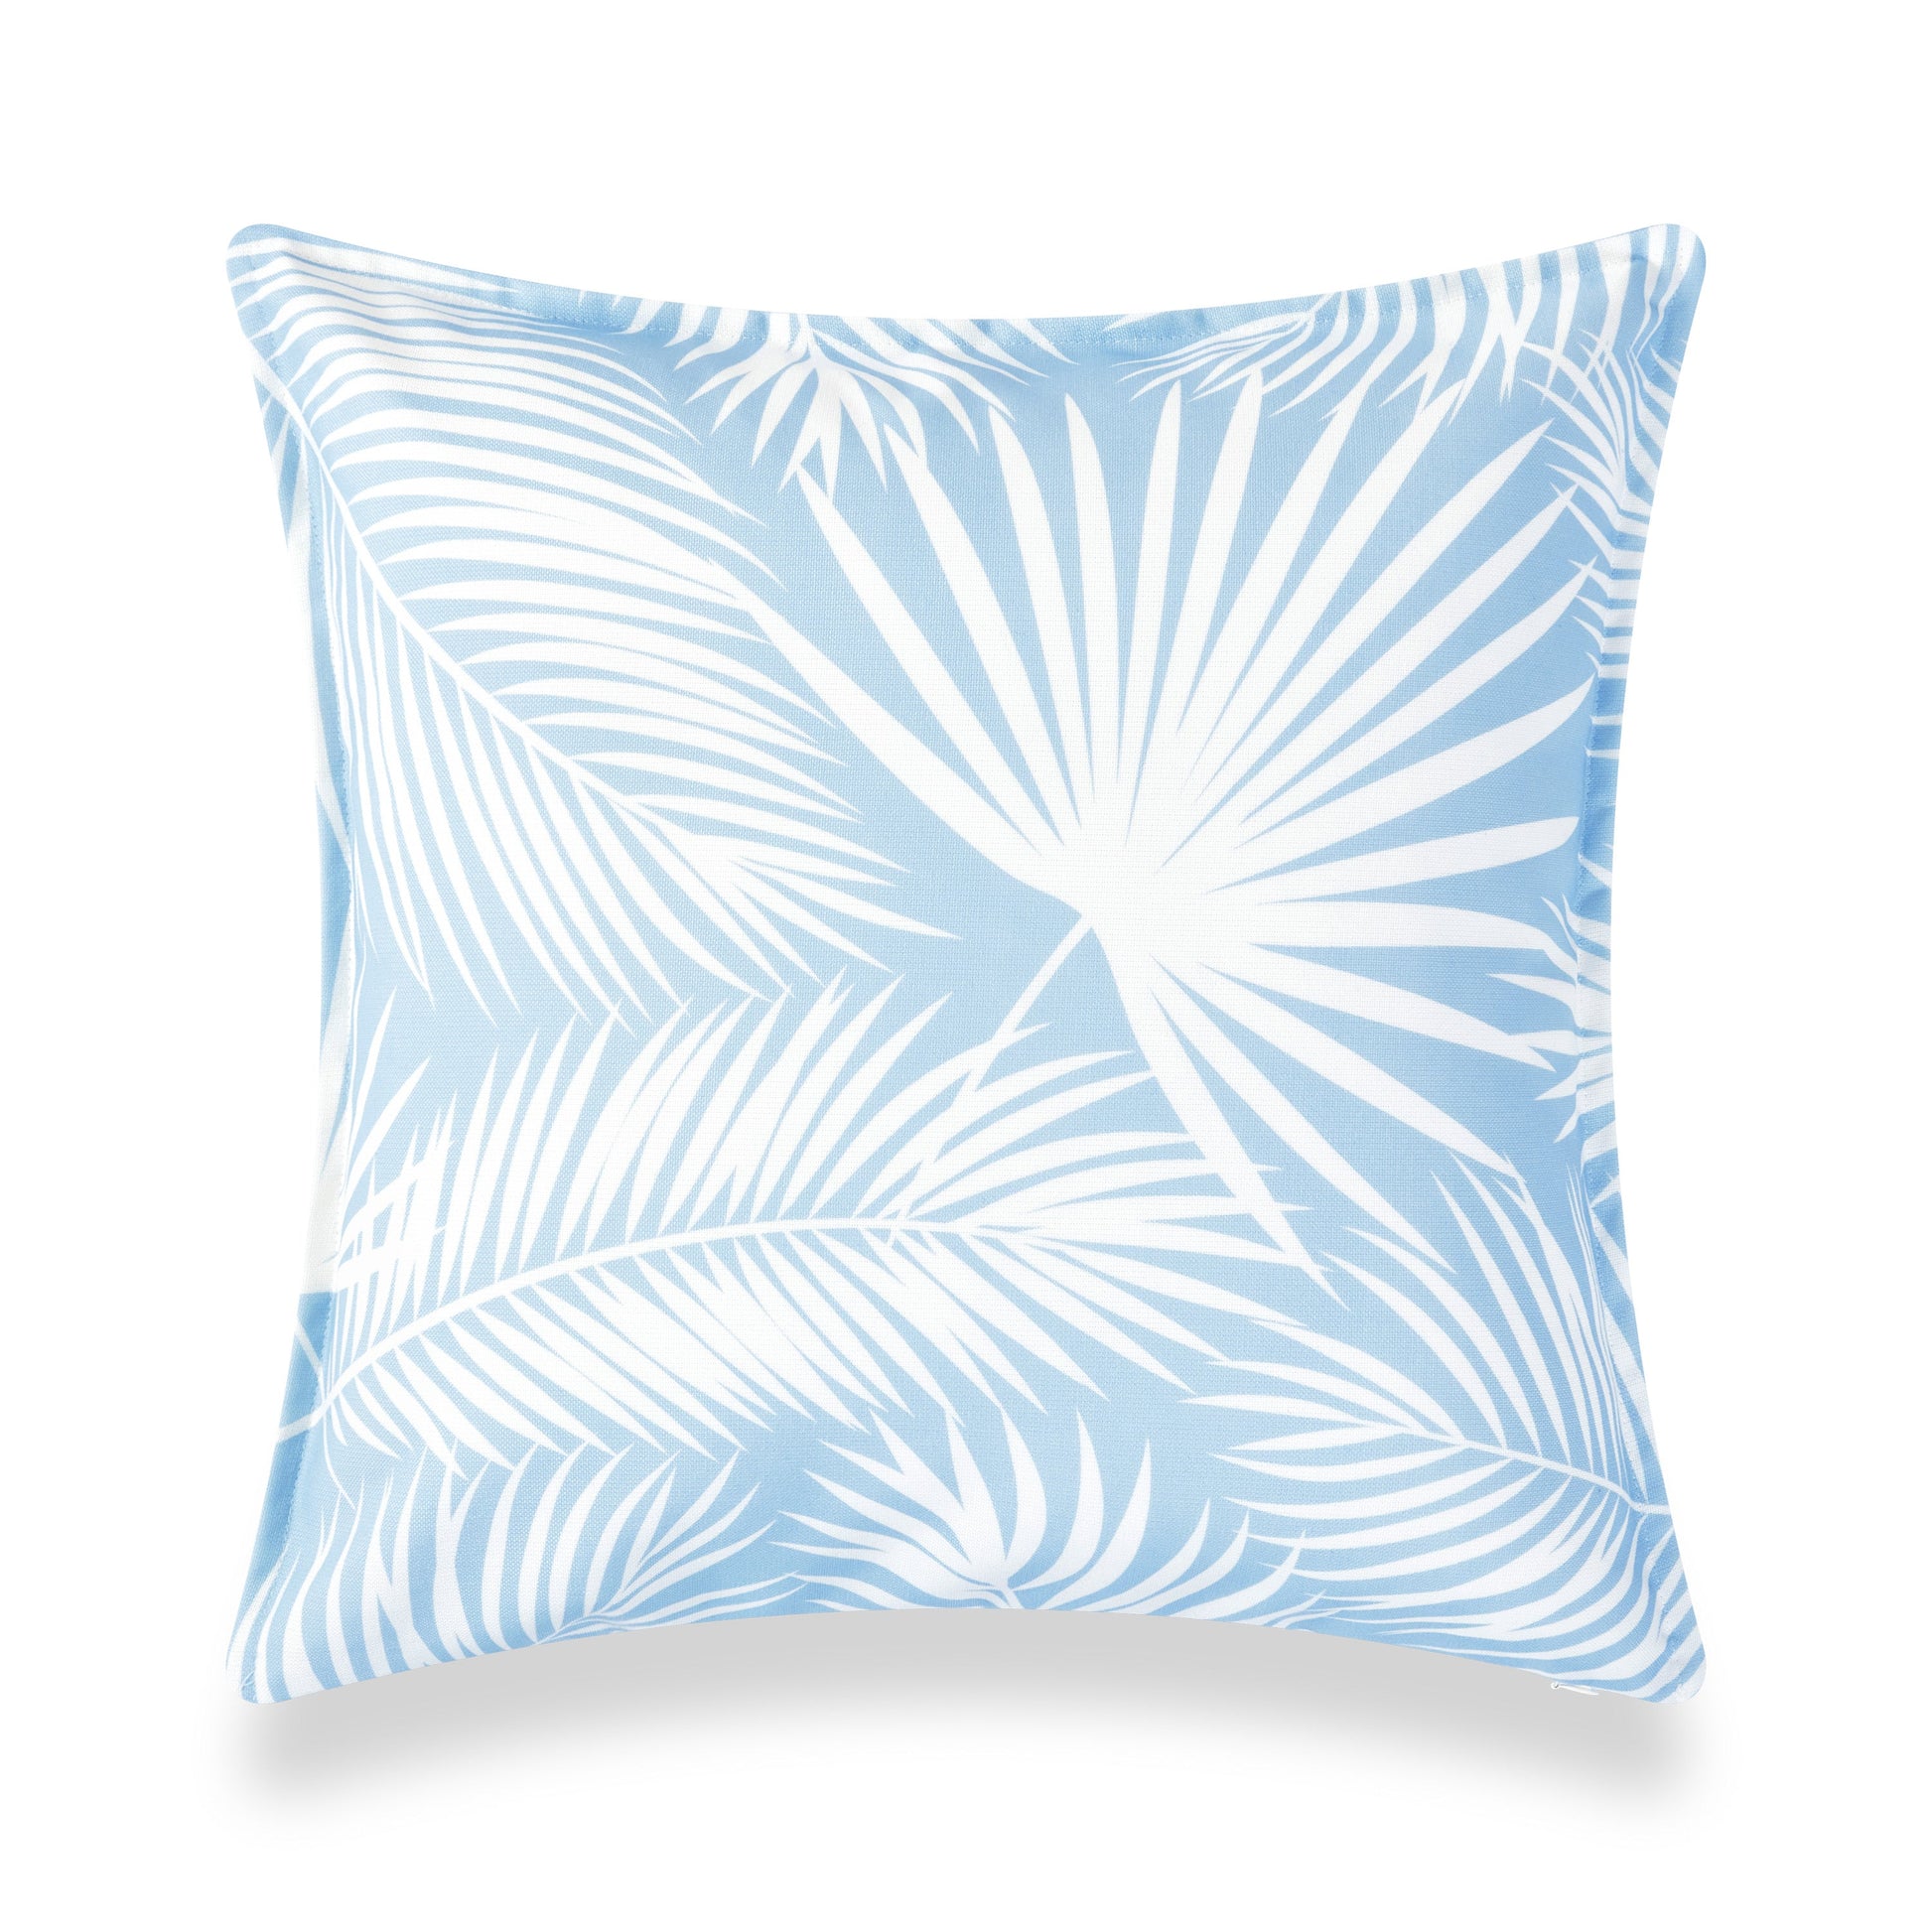 Coastal Hampton Style Indoor Outdoor Pillow Cover, Palm Leaf, Baby Blue, 20"x20"-4